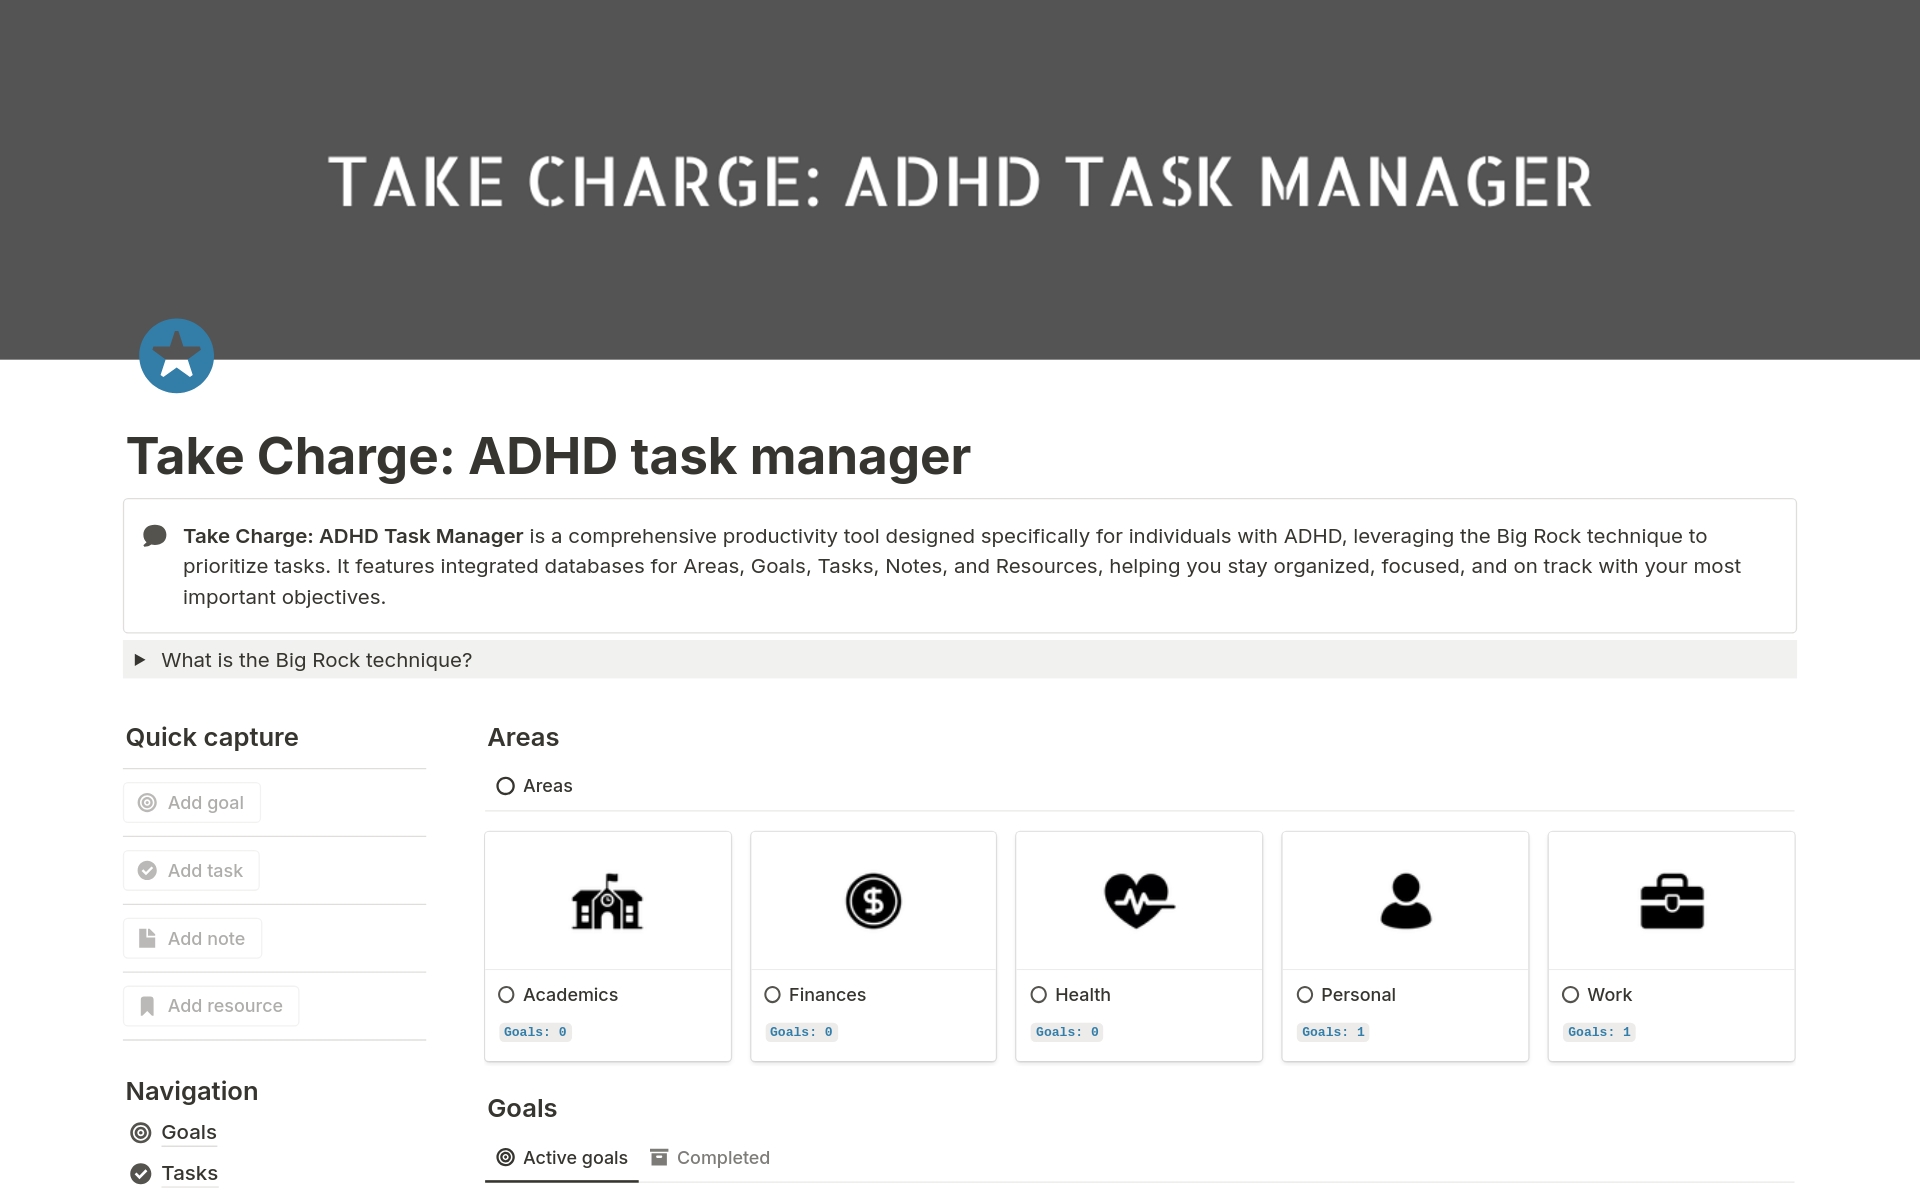 Take Charge: ADHD Task Manager is a comprehensive productivity tool designed specifically for individuals with ADHD, leveraging the Big Rock technique to prioritize tasks. It features integrated databases for Areas, Goals, Tasks, Notes, and Resources, helping you stay organized.